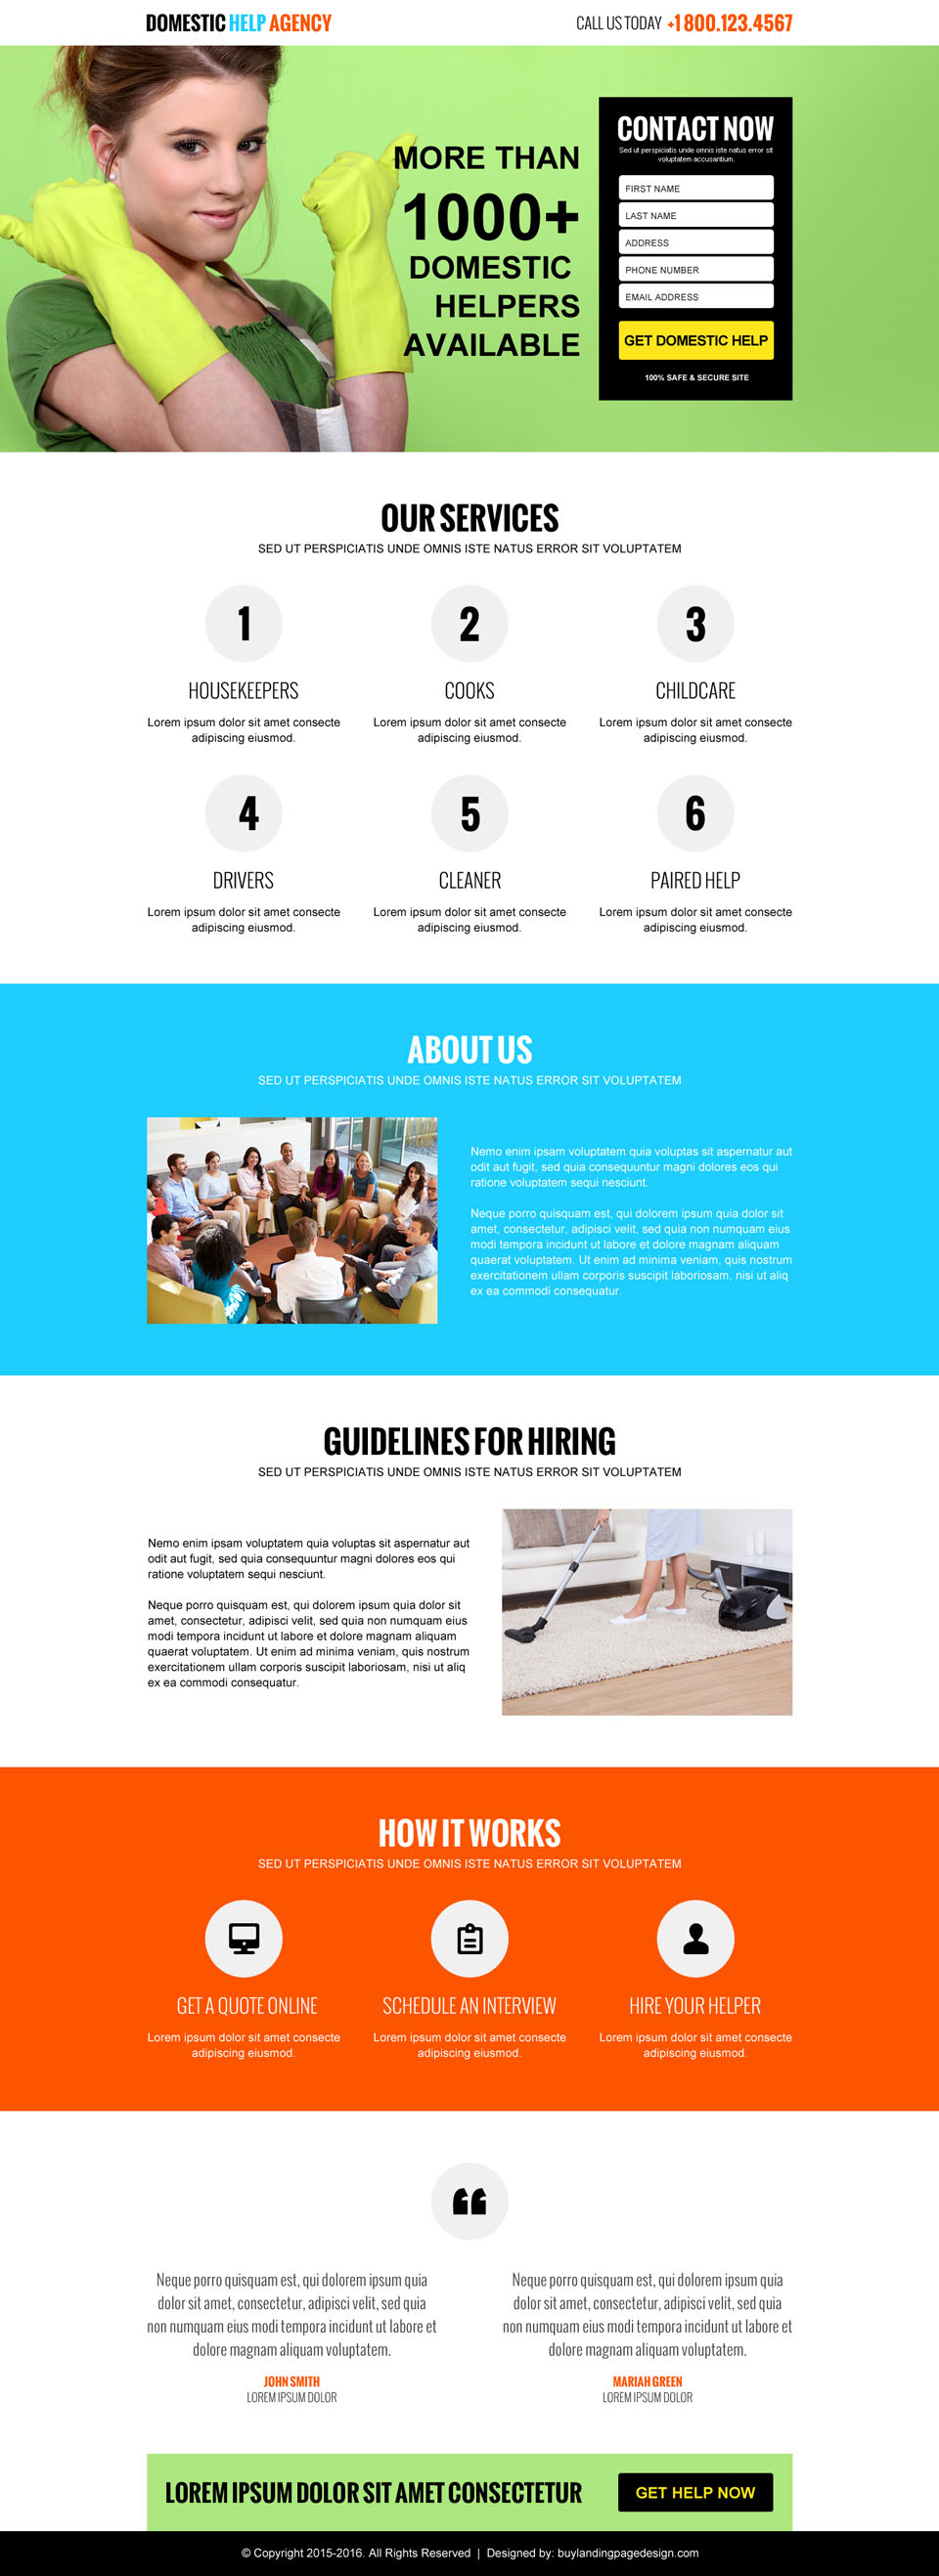 domestic-help-agency-lead-capture-landing-page-design-template-001